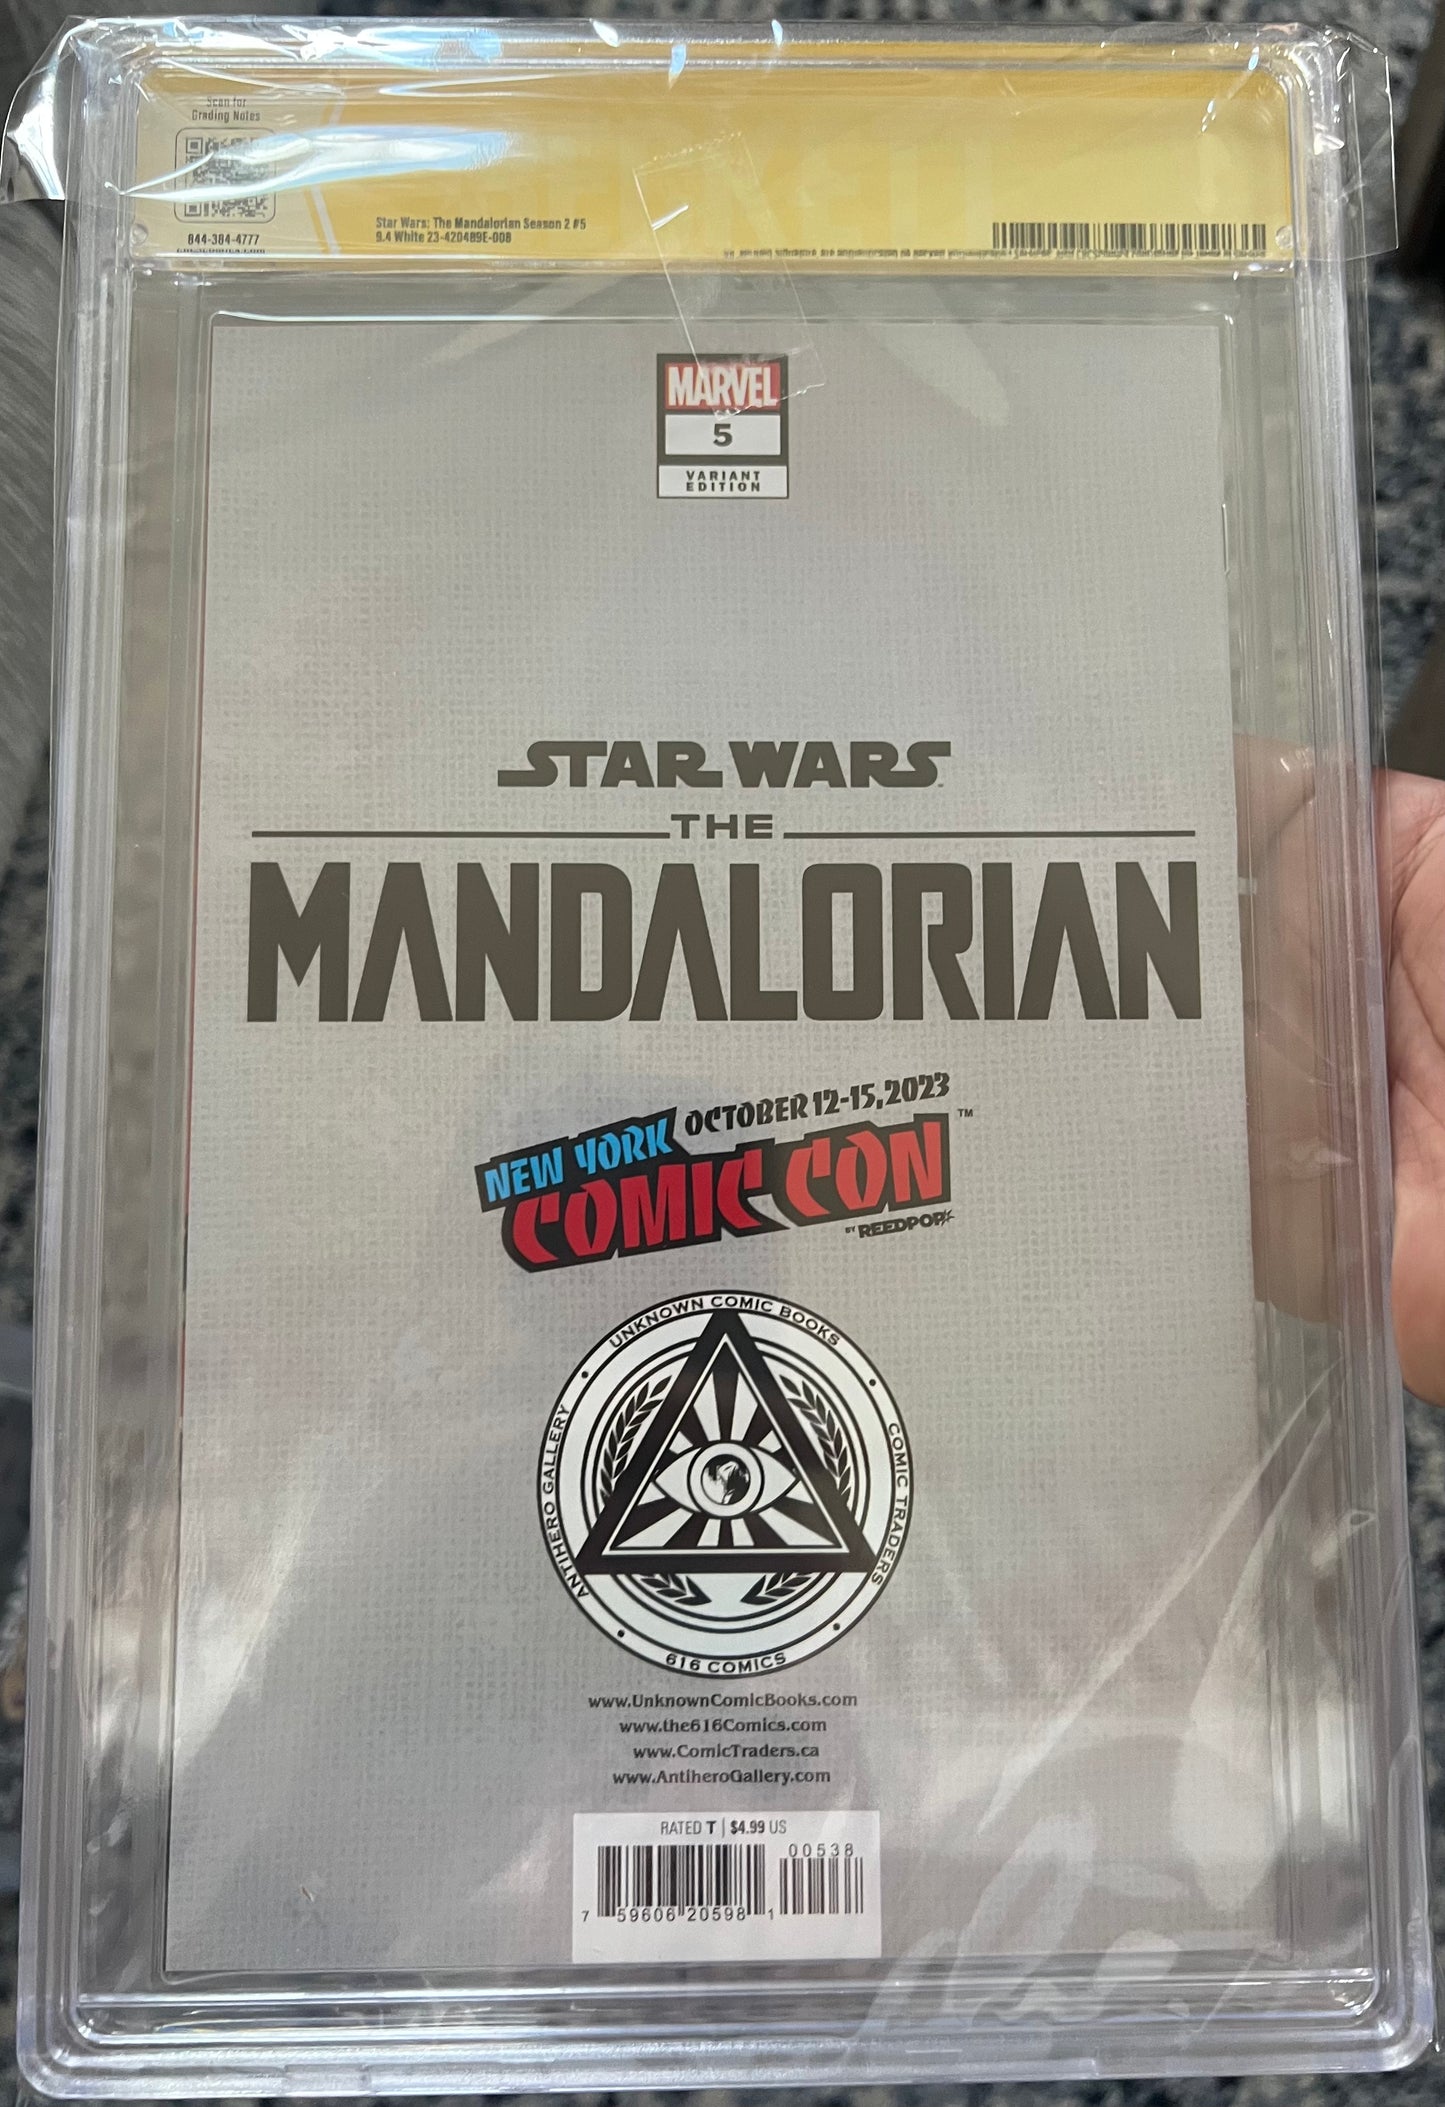 Star Wars Mandalorian #5 CBCS 9.4 (NYCC 2023 Exclusive) signed by Peach Momoko